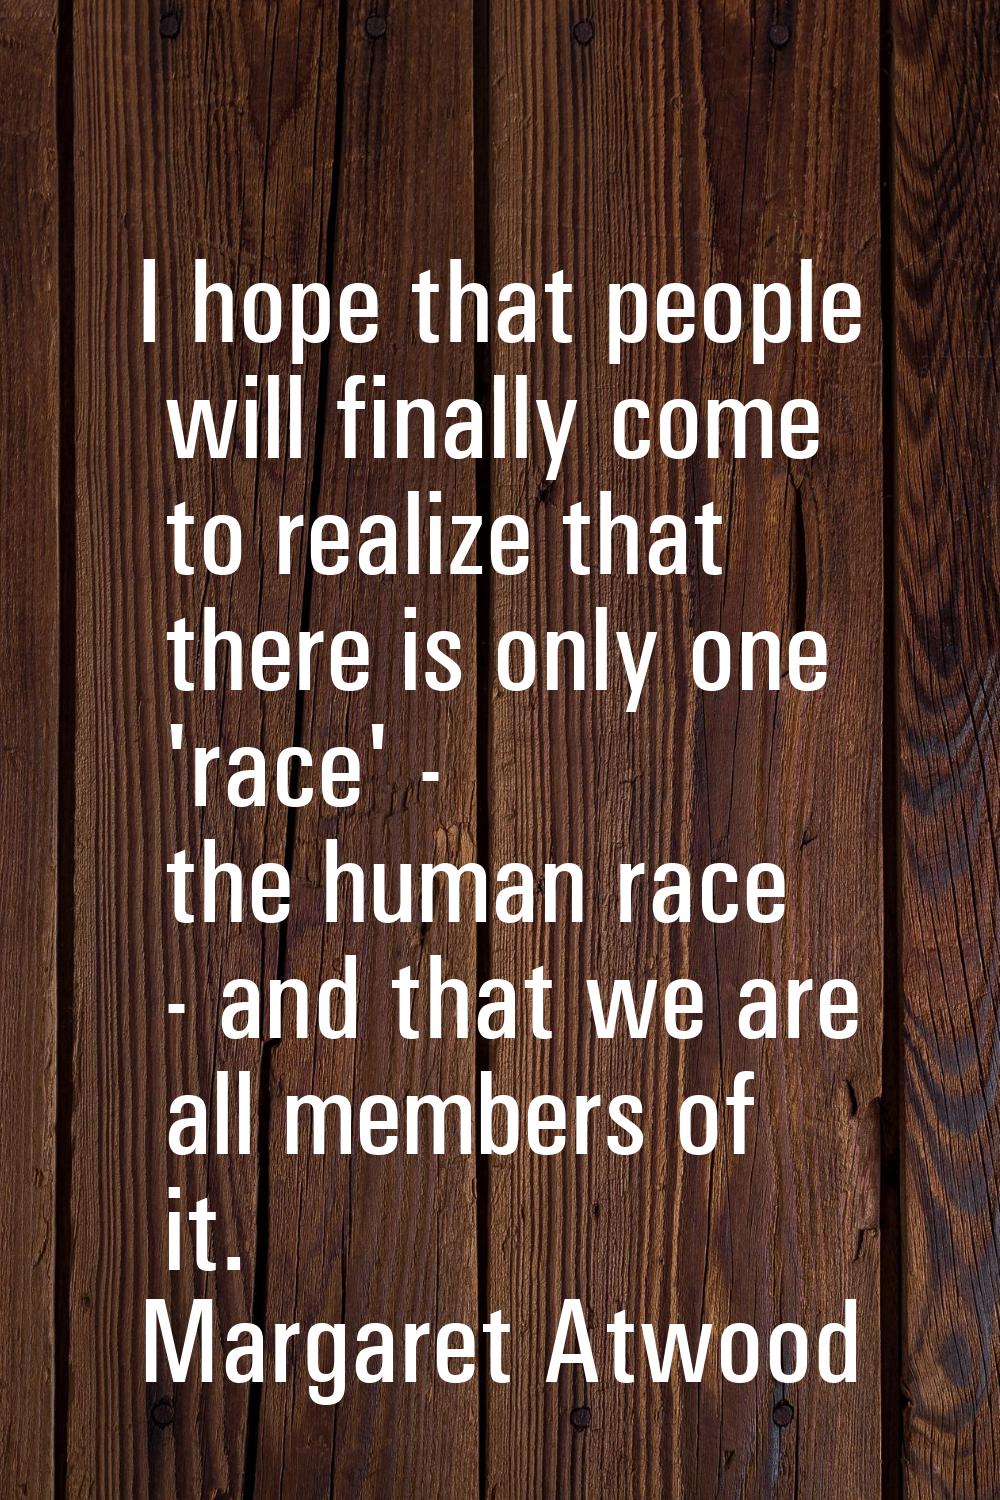 I hope that people will finally come to realize that there is only one 'race' - the human race - an